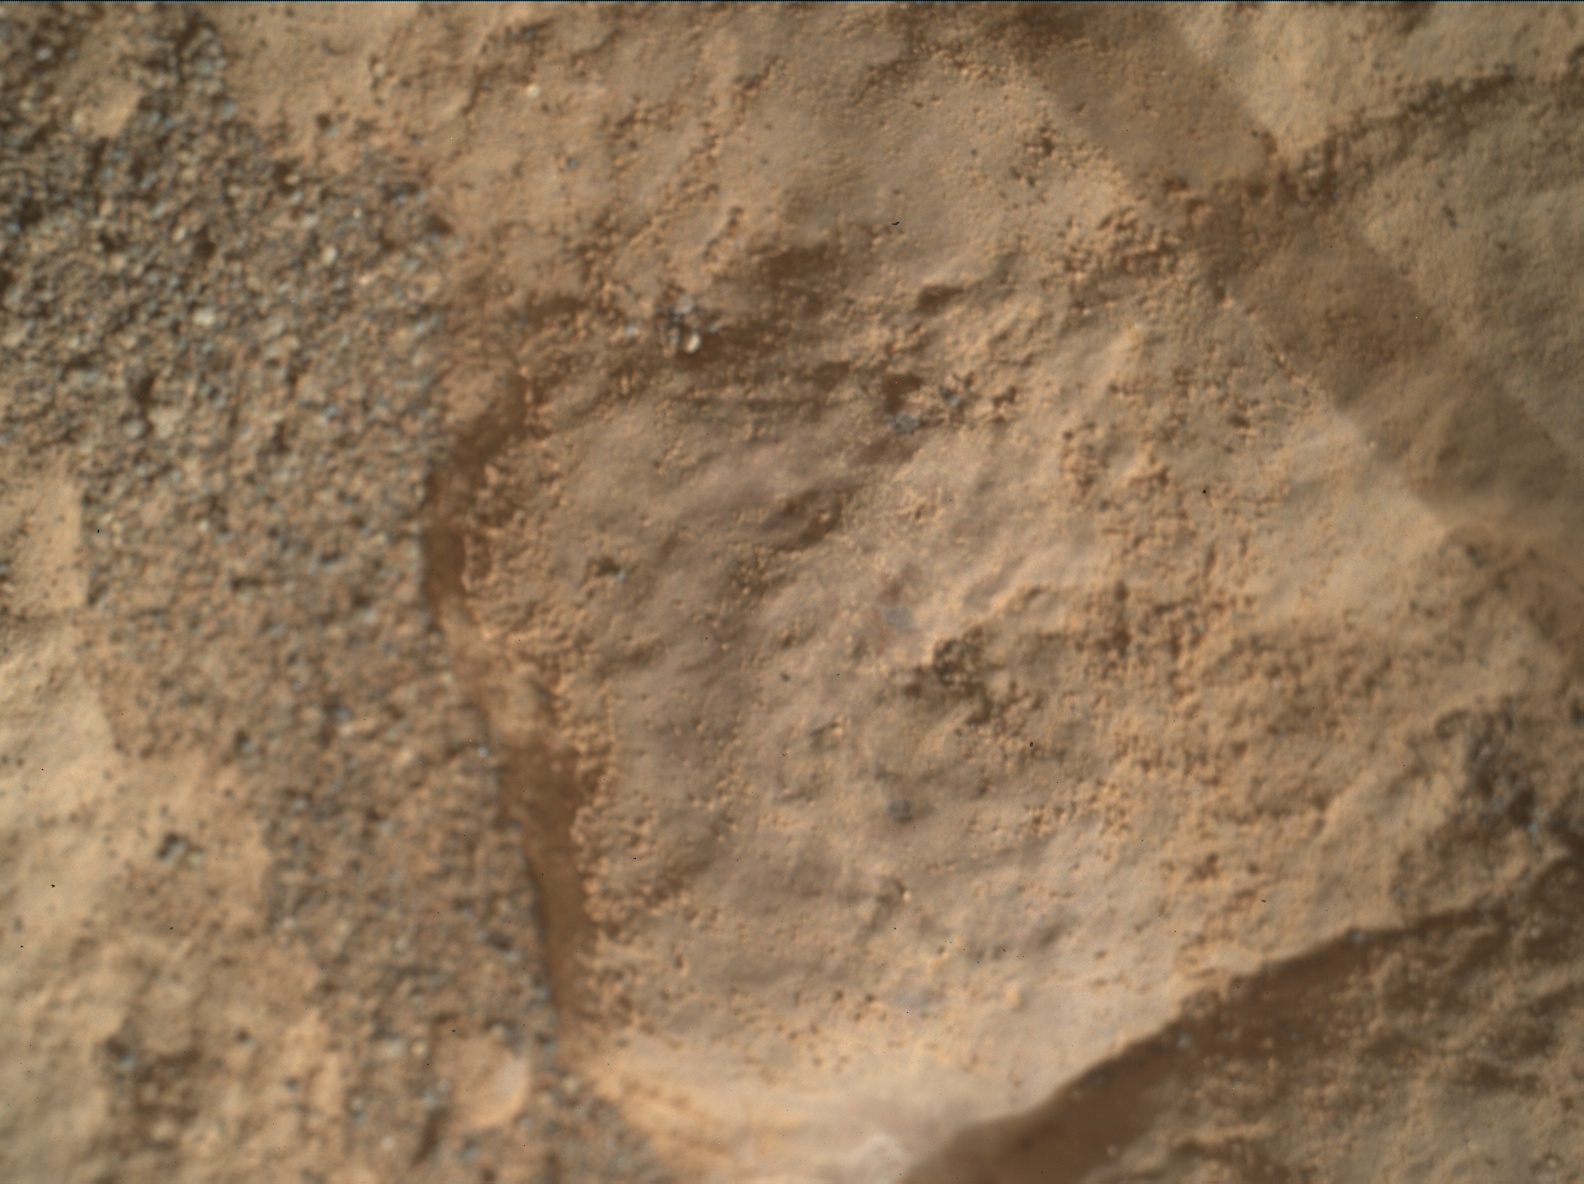 Nasa's Mars rover Curiosity acquired this image using its Mars Hand Lens Imager (MAHLI) on Sol 2474